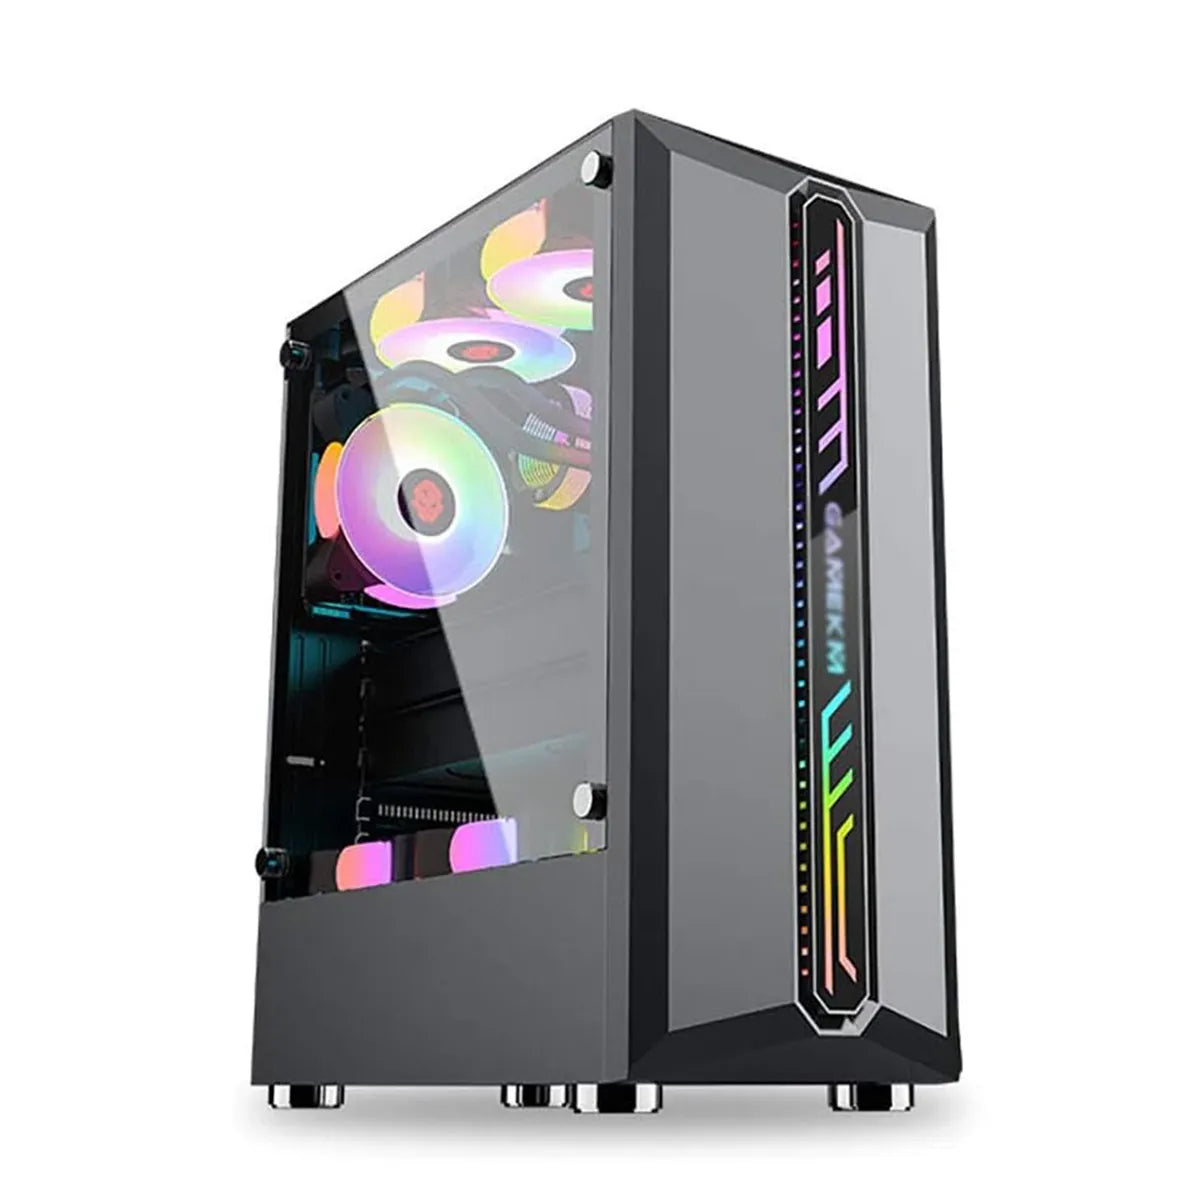 Galaxy ATX/M-ATX/ITX Gaming PC Desktop Computer Case Black with Side Tempered Glass Panels with 6 Fan Support